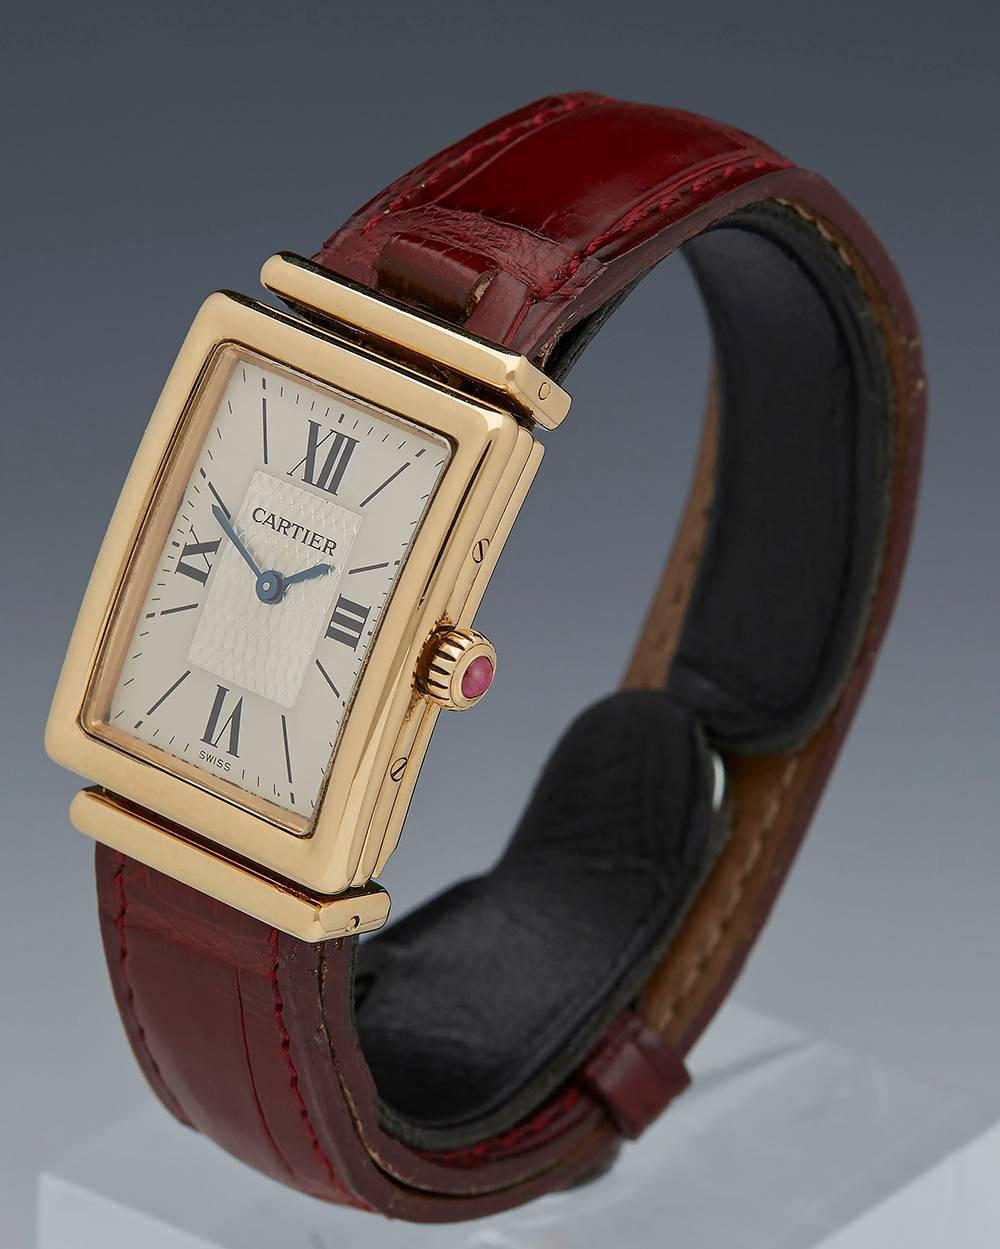 Ref 	COM043
Condition 	9 - Excellent condition
Gender 	Ladies
Age 	1990's
Case Size 	24mm by 30mm
Box & Papers 	Cartier Box
Movement 	Mechanical Manual Wind
Case 	18k Yellow Gold
Dial 	Silver with Black Roman Numerals
Bracelet 	Burgandy